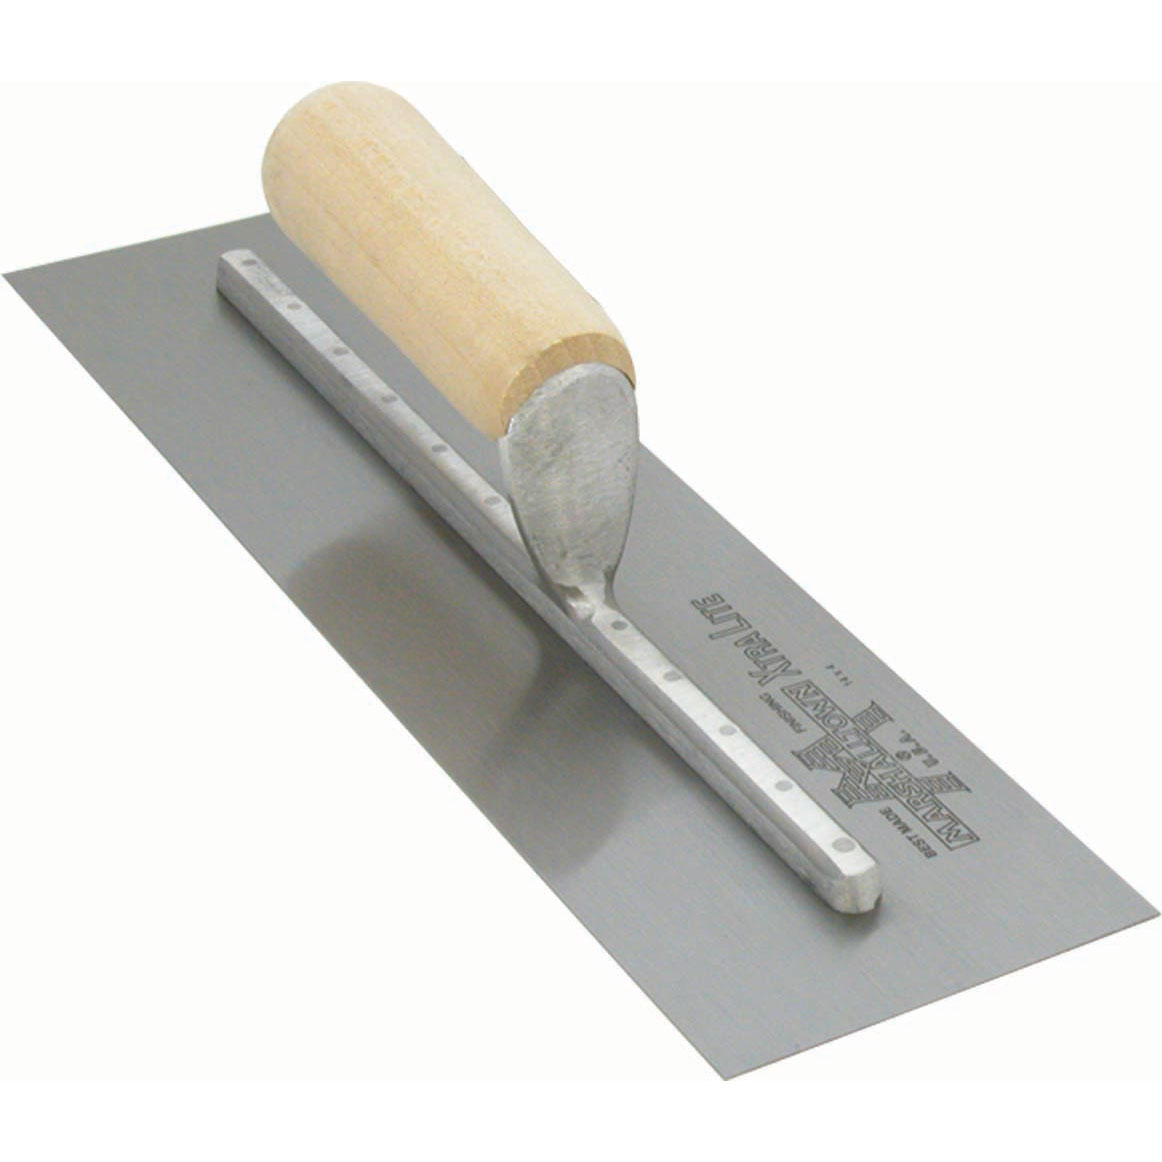 Marshalltown MX66 16in. x 4in. High Carbon Steel Finishing Trowel with Wood MAT-MX66